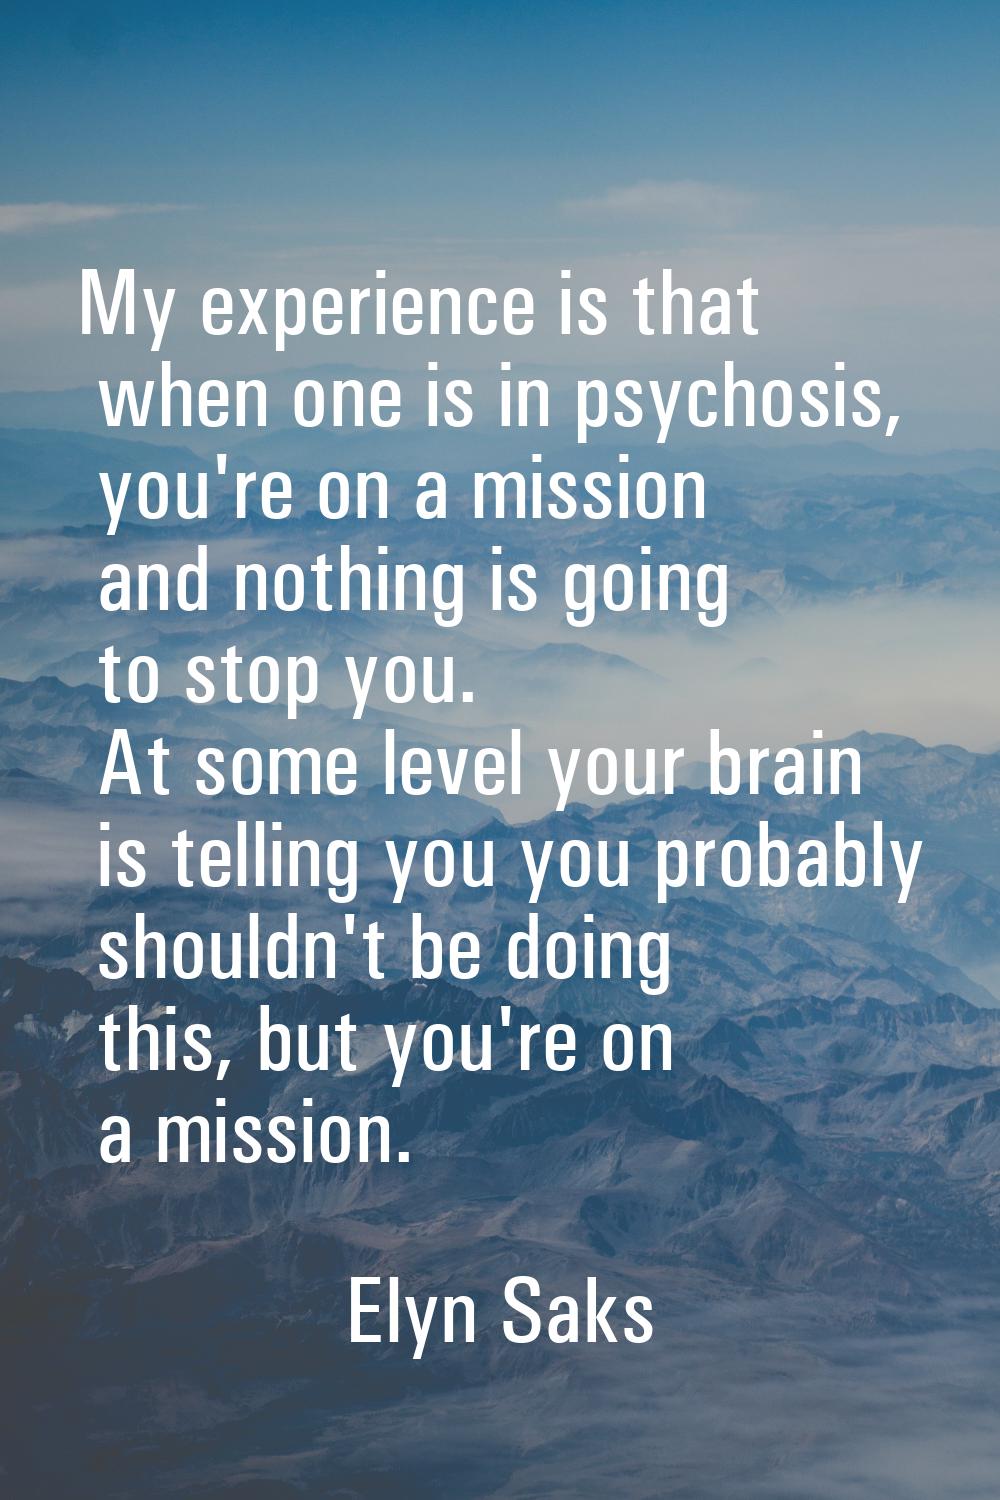 My experience is that when one is in psychosis, you're on a mission and nothing is going to stop yo